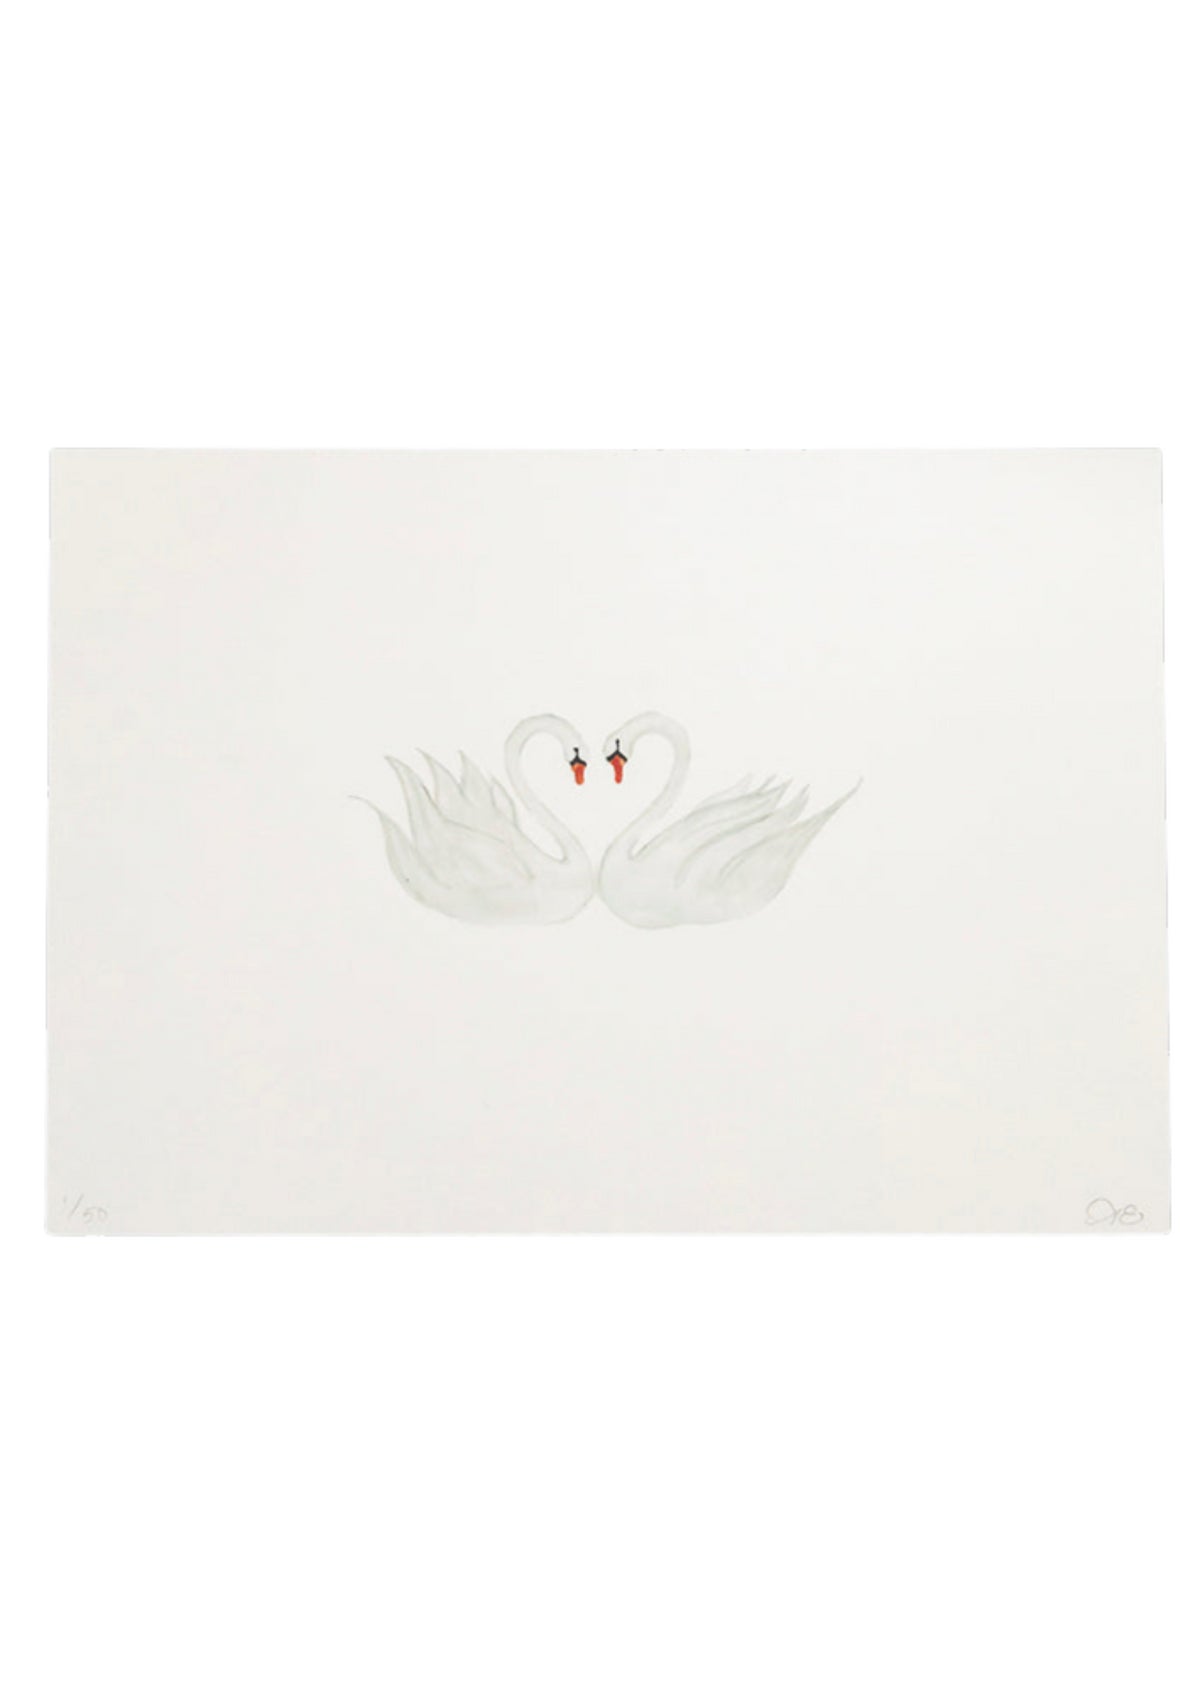 Limited Edition Pair of Swans Print